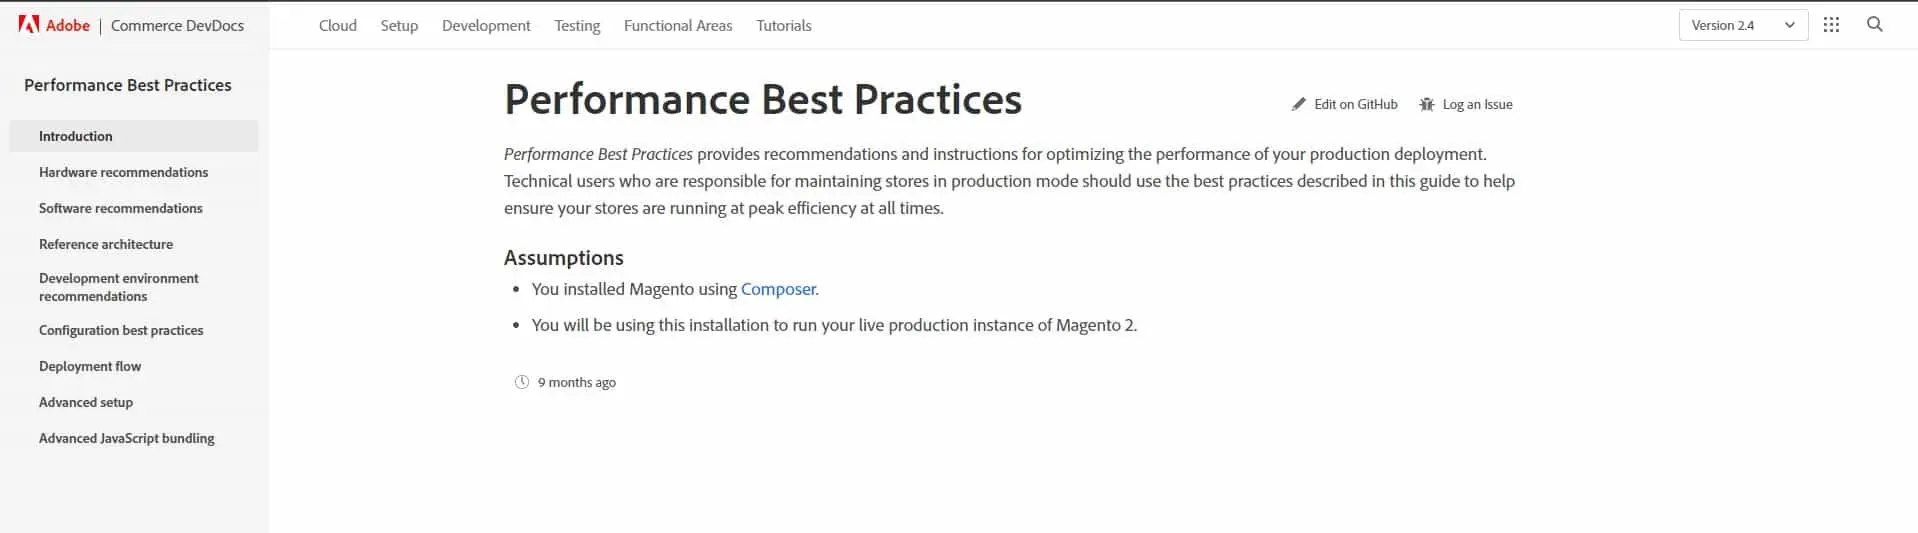 Adobe subsite presenting Performance best practices